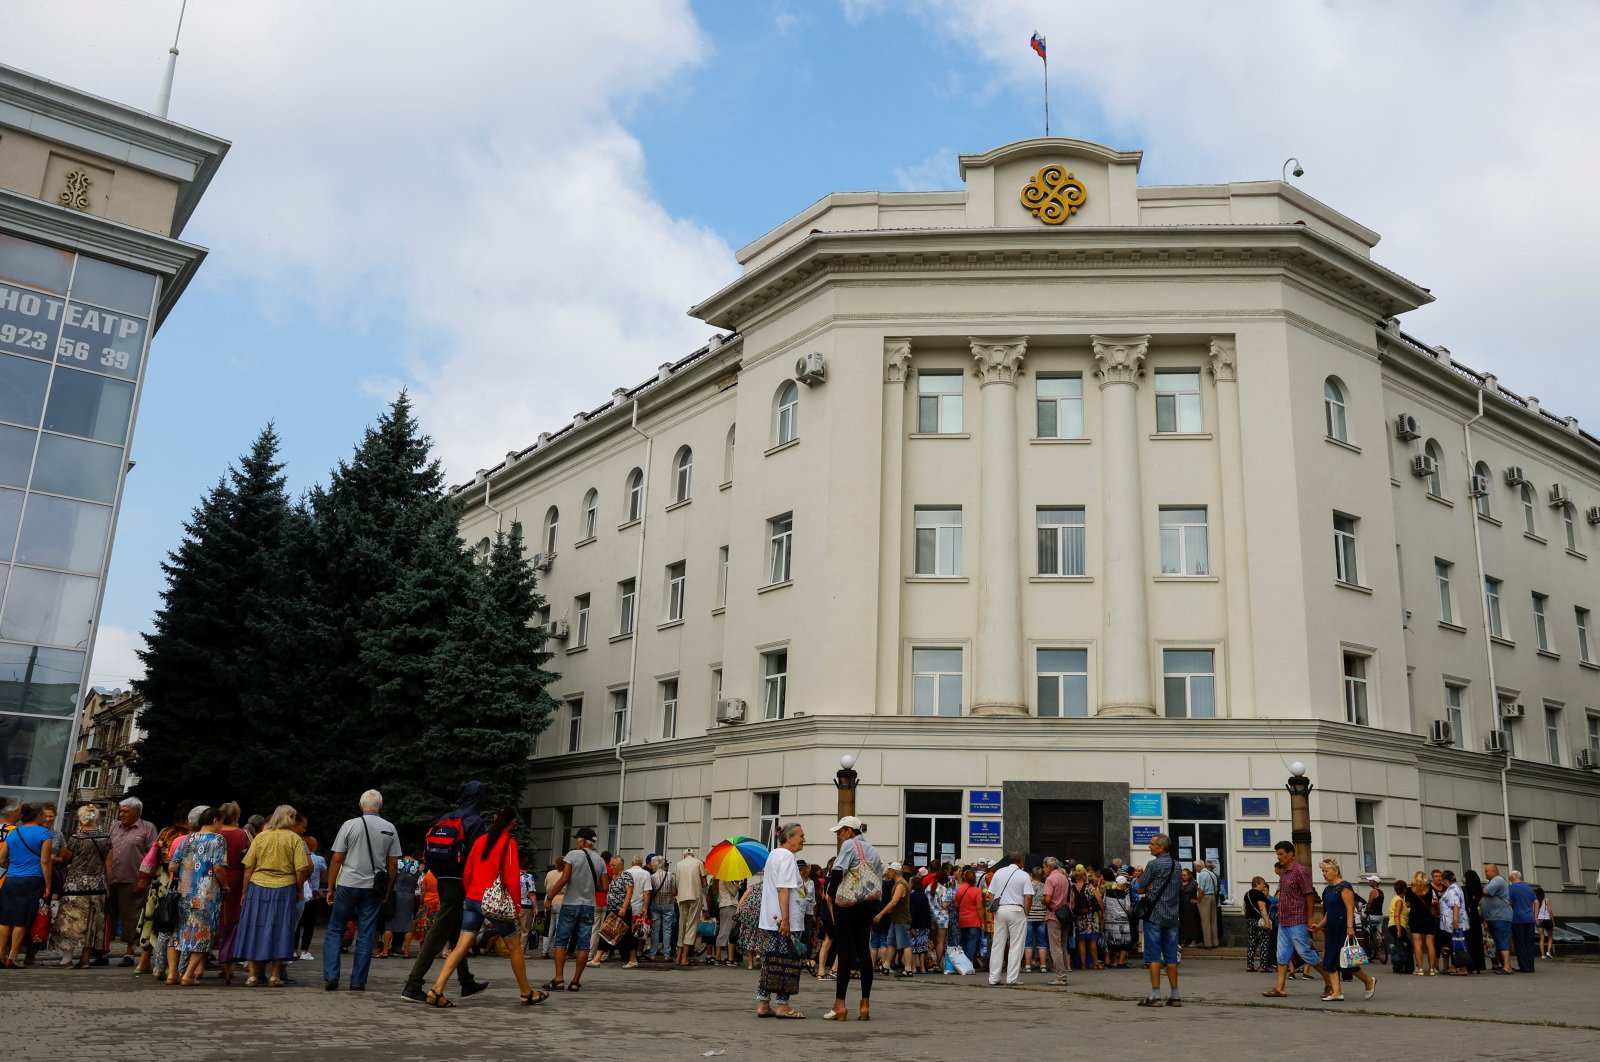 Local residents gather to receive financial aid during the Ukraine-Russia conflict in the Russia-controlled city of Kherson, Ukraine, July 25, 2022. (Reuters Photo)